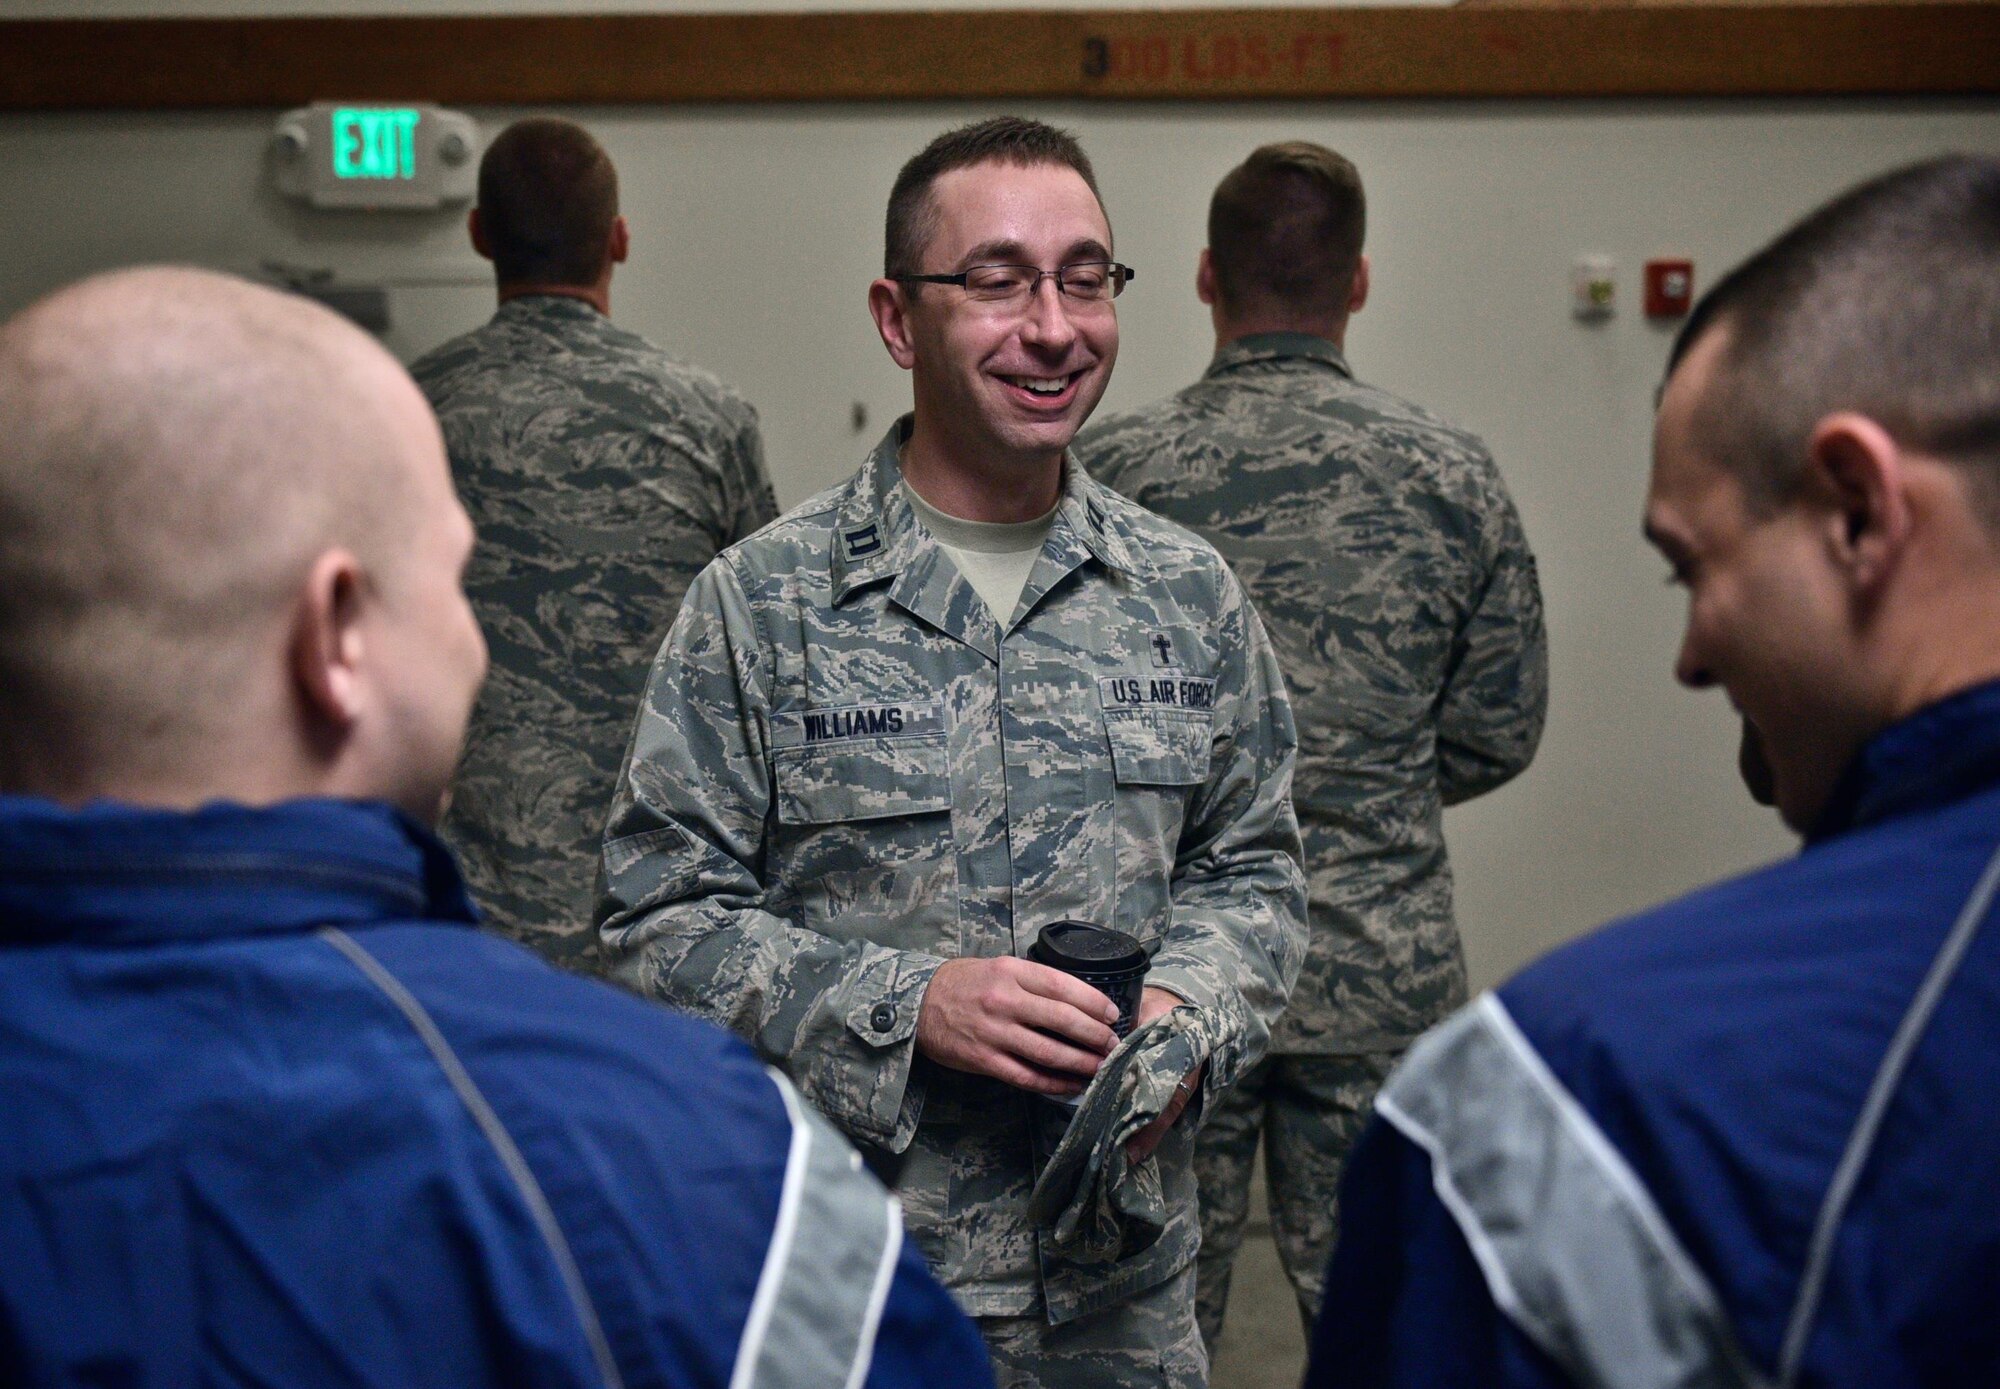 Chaplain (Capt.) Mike Williams, 932nd Airlift Wing, shares a laugh with 932nd AW Security Forces members during the SFS morning briefing, Oct. 1, 2016, Scott Air Force Base, Illinois.  932nd chaplains and chaplain assistants, referred to as Religious Support
Teams (RST), have the privilege of focusing on caring for unit members and
their families throughout the deployment cycle.  Unit visits and personal engagements are a part of this warrior care.  "The 932nd AW Religious Support Teams provide proactive pastoral care as
well as religious accommodations that meet diverse spiritual needs, in order to foster the spiritual pillar of Comprehensive Airman Fitness within the Wing," said Chaplain (Lt. Col.) William Thornton.  (U.S. Air Force photo by Tech. Sgt. Christopher Parr)